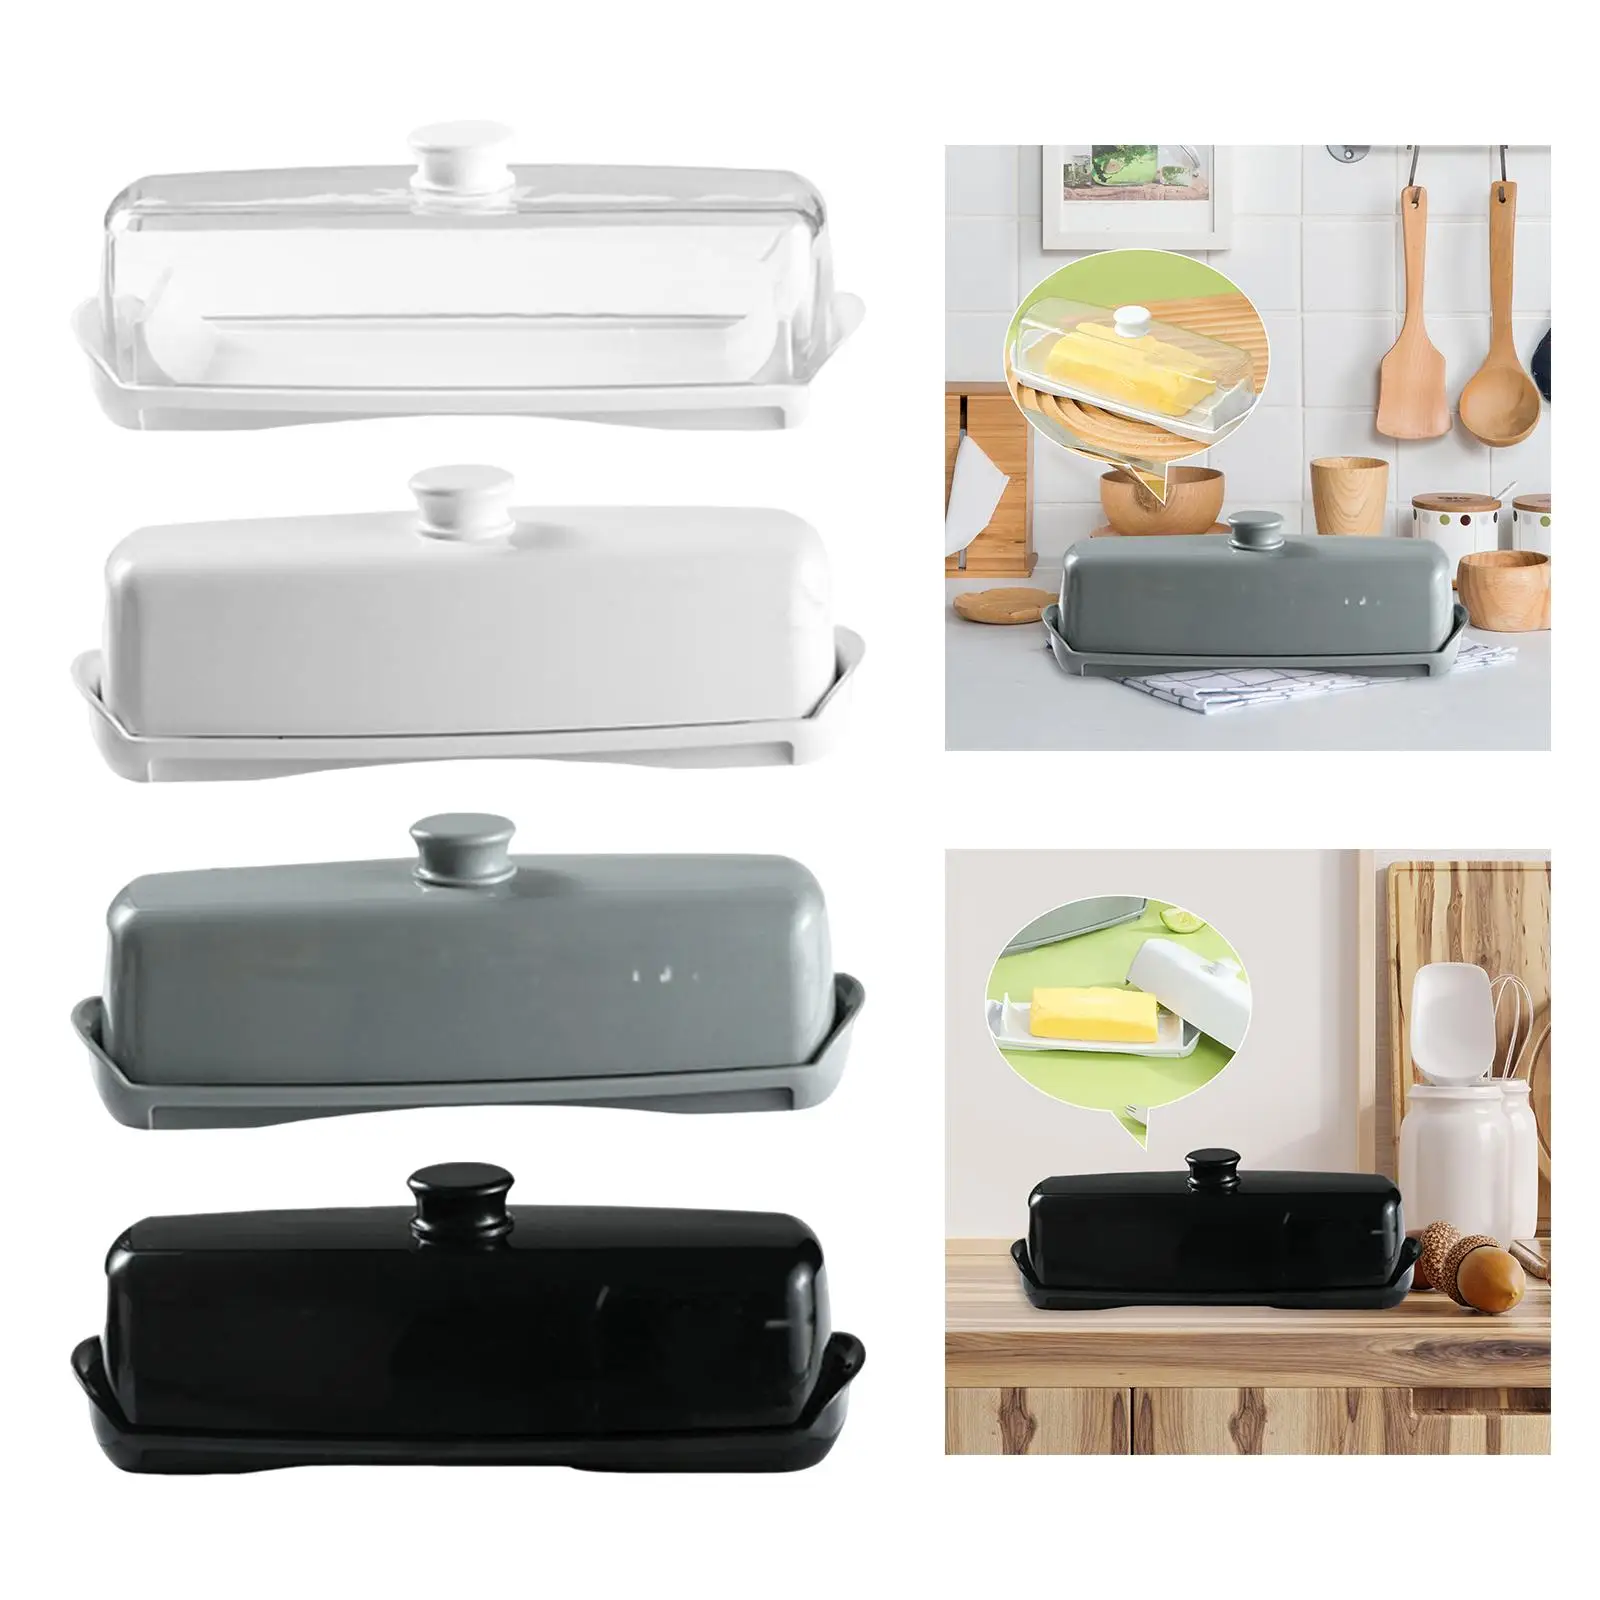 Household Butter Dish Cheese Storage Box Sealing Dish Tray for Baking Cafe